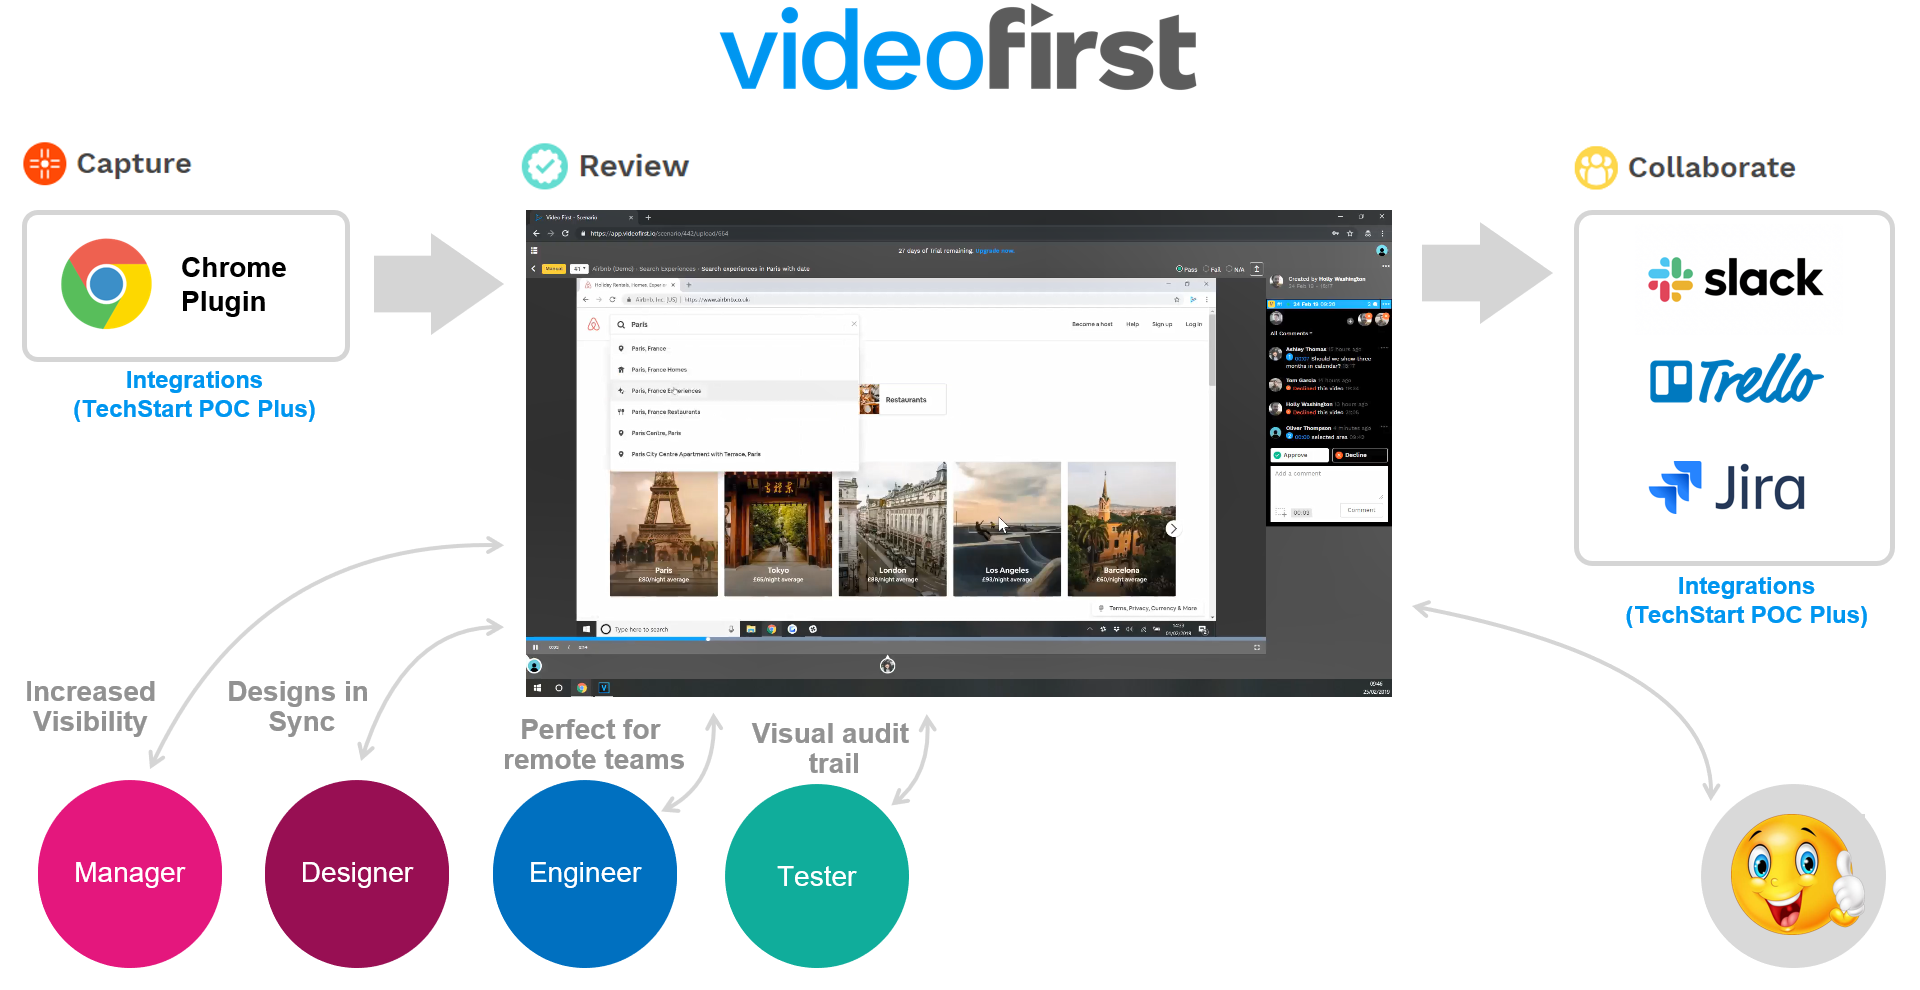 Video first the solution